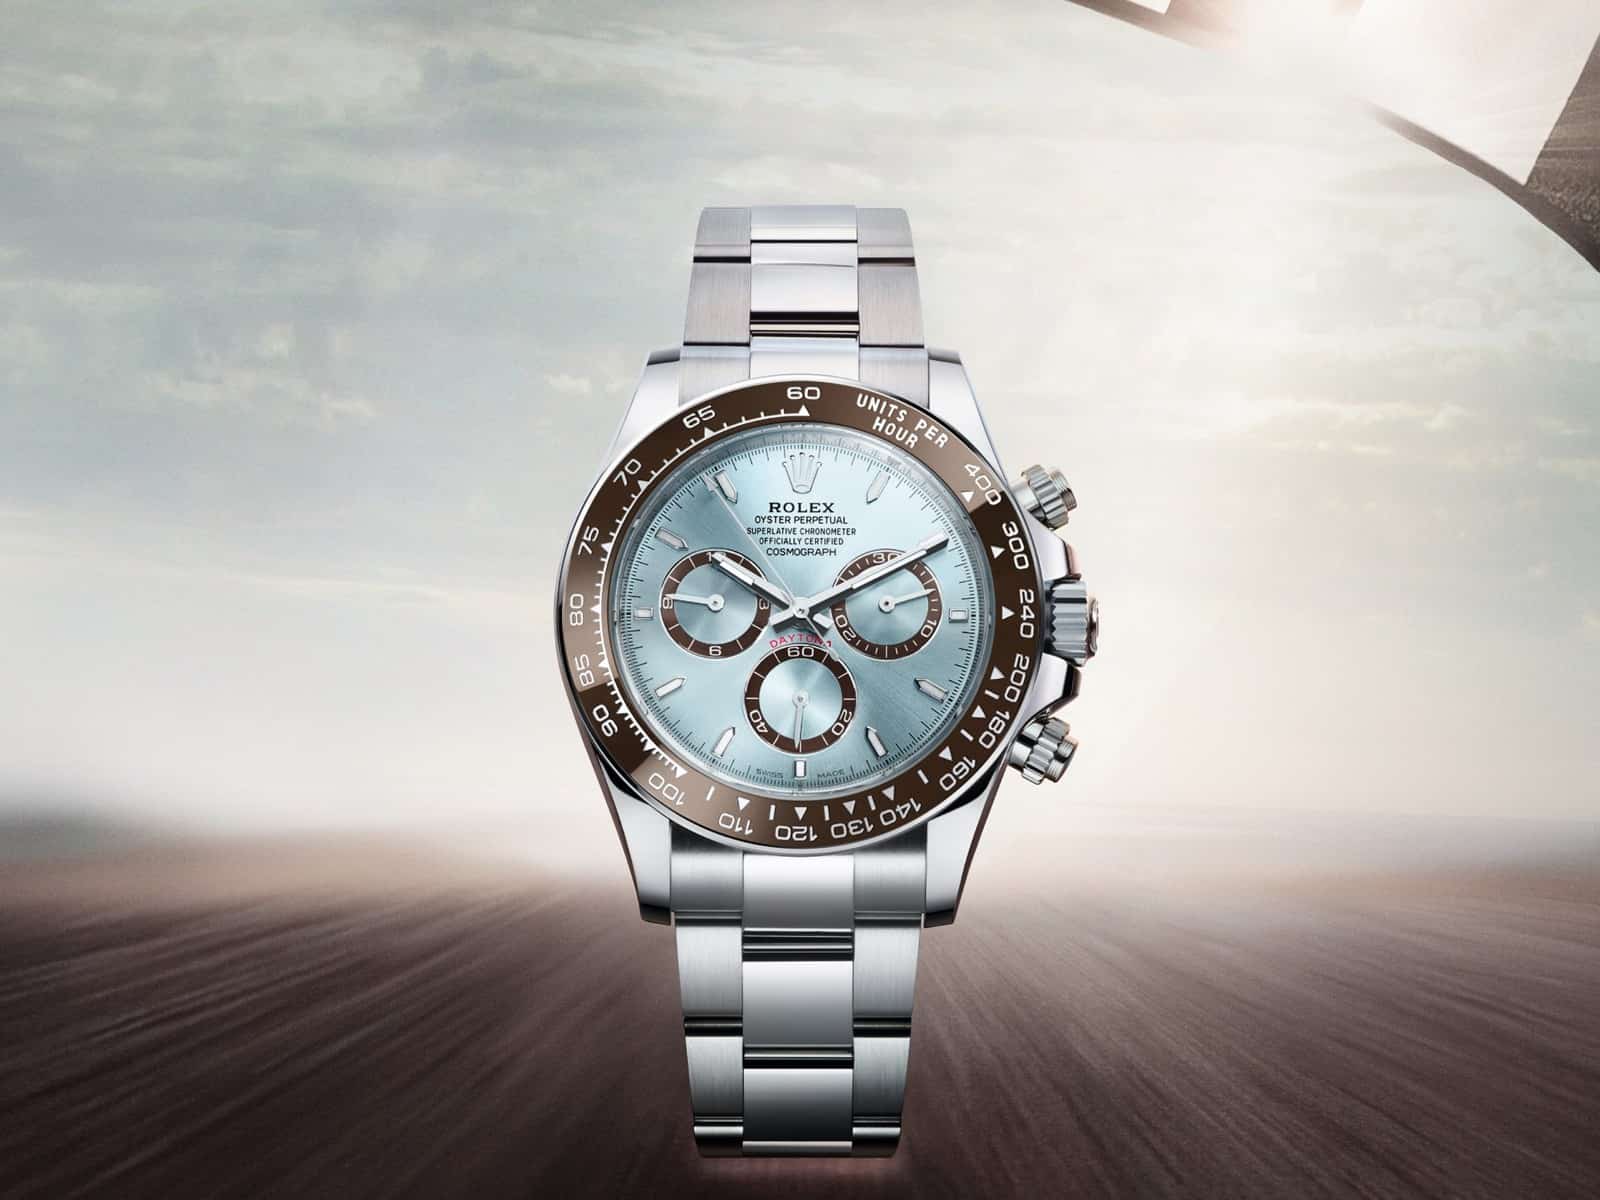 Rolex Oyster Perpetual Cosmograph Daytona Ref 126506 in Platin